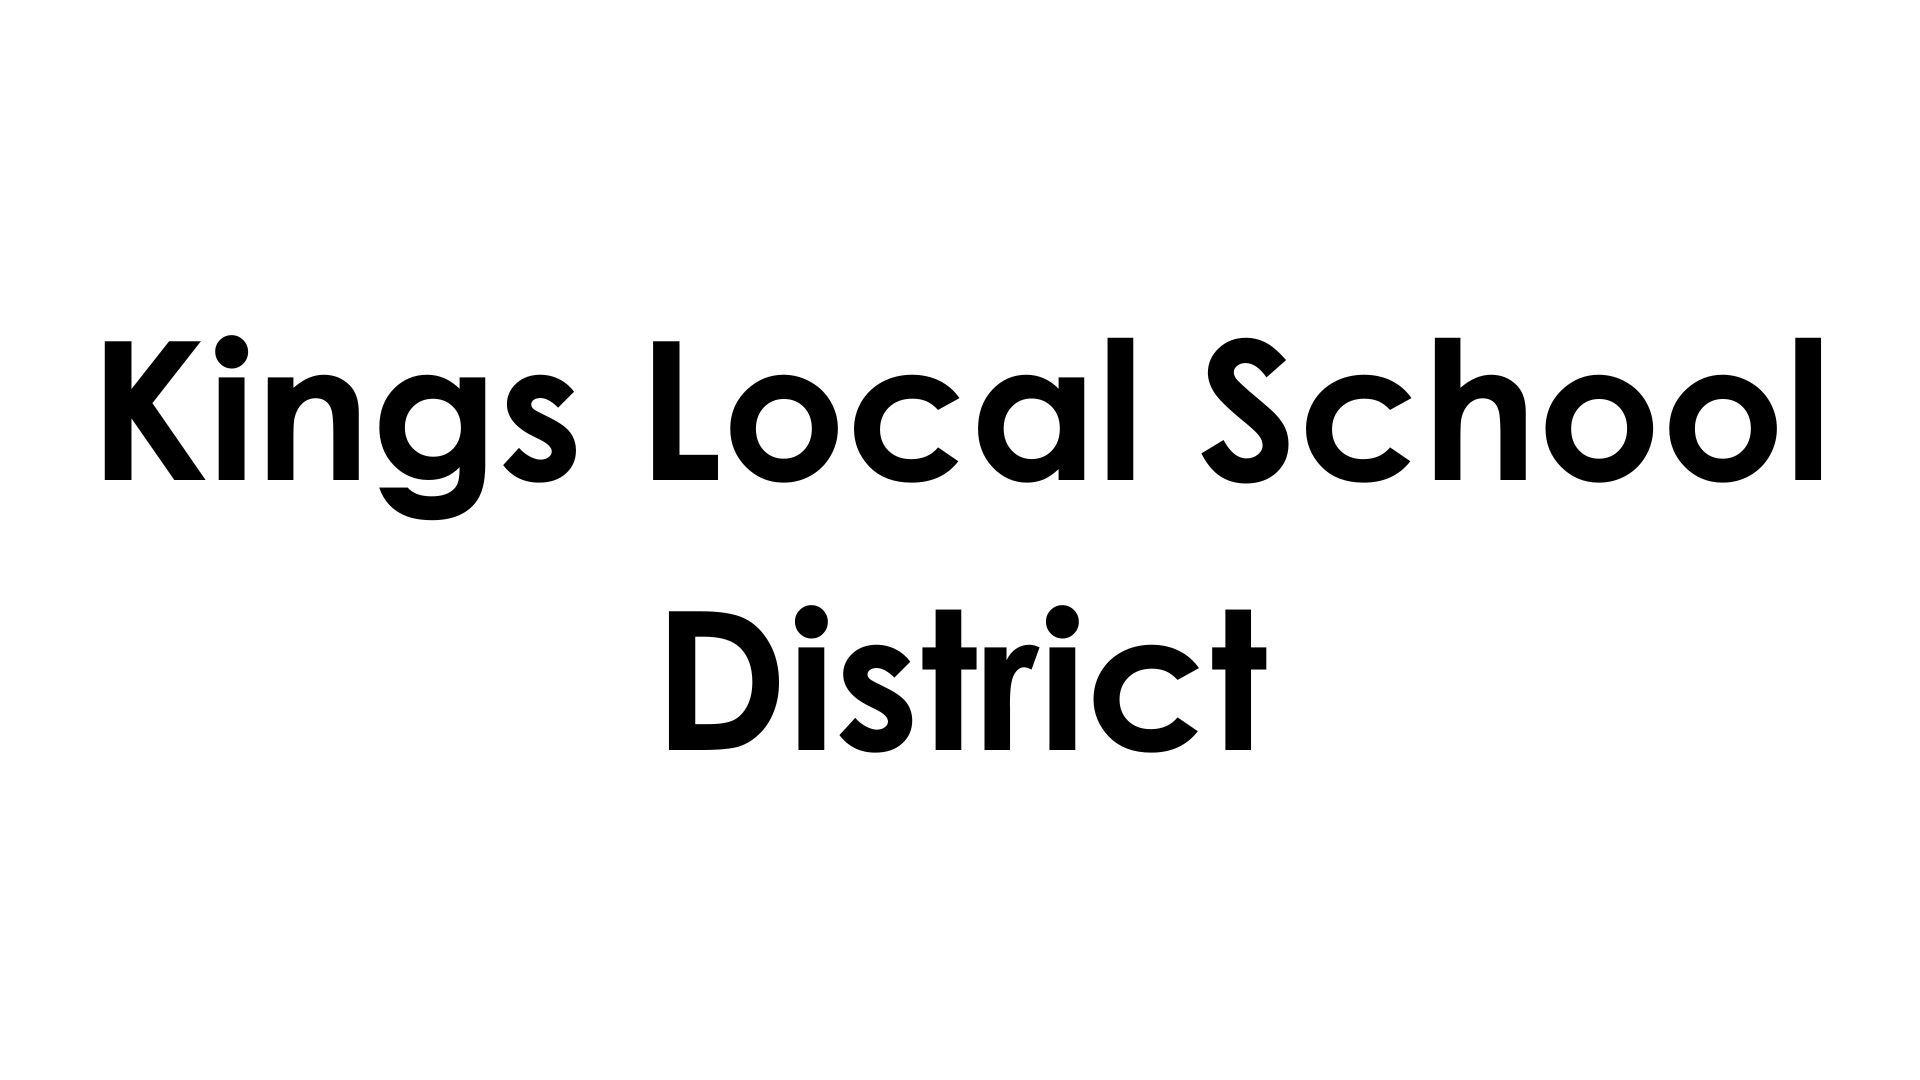 Kings Local School District